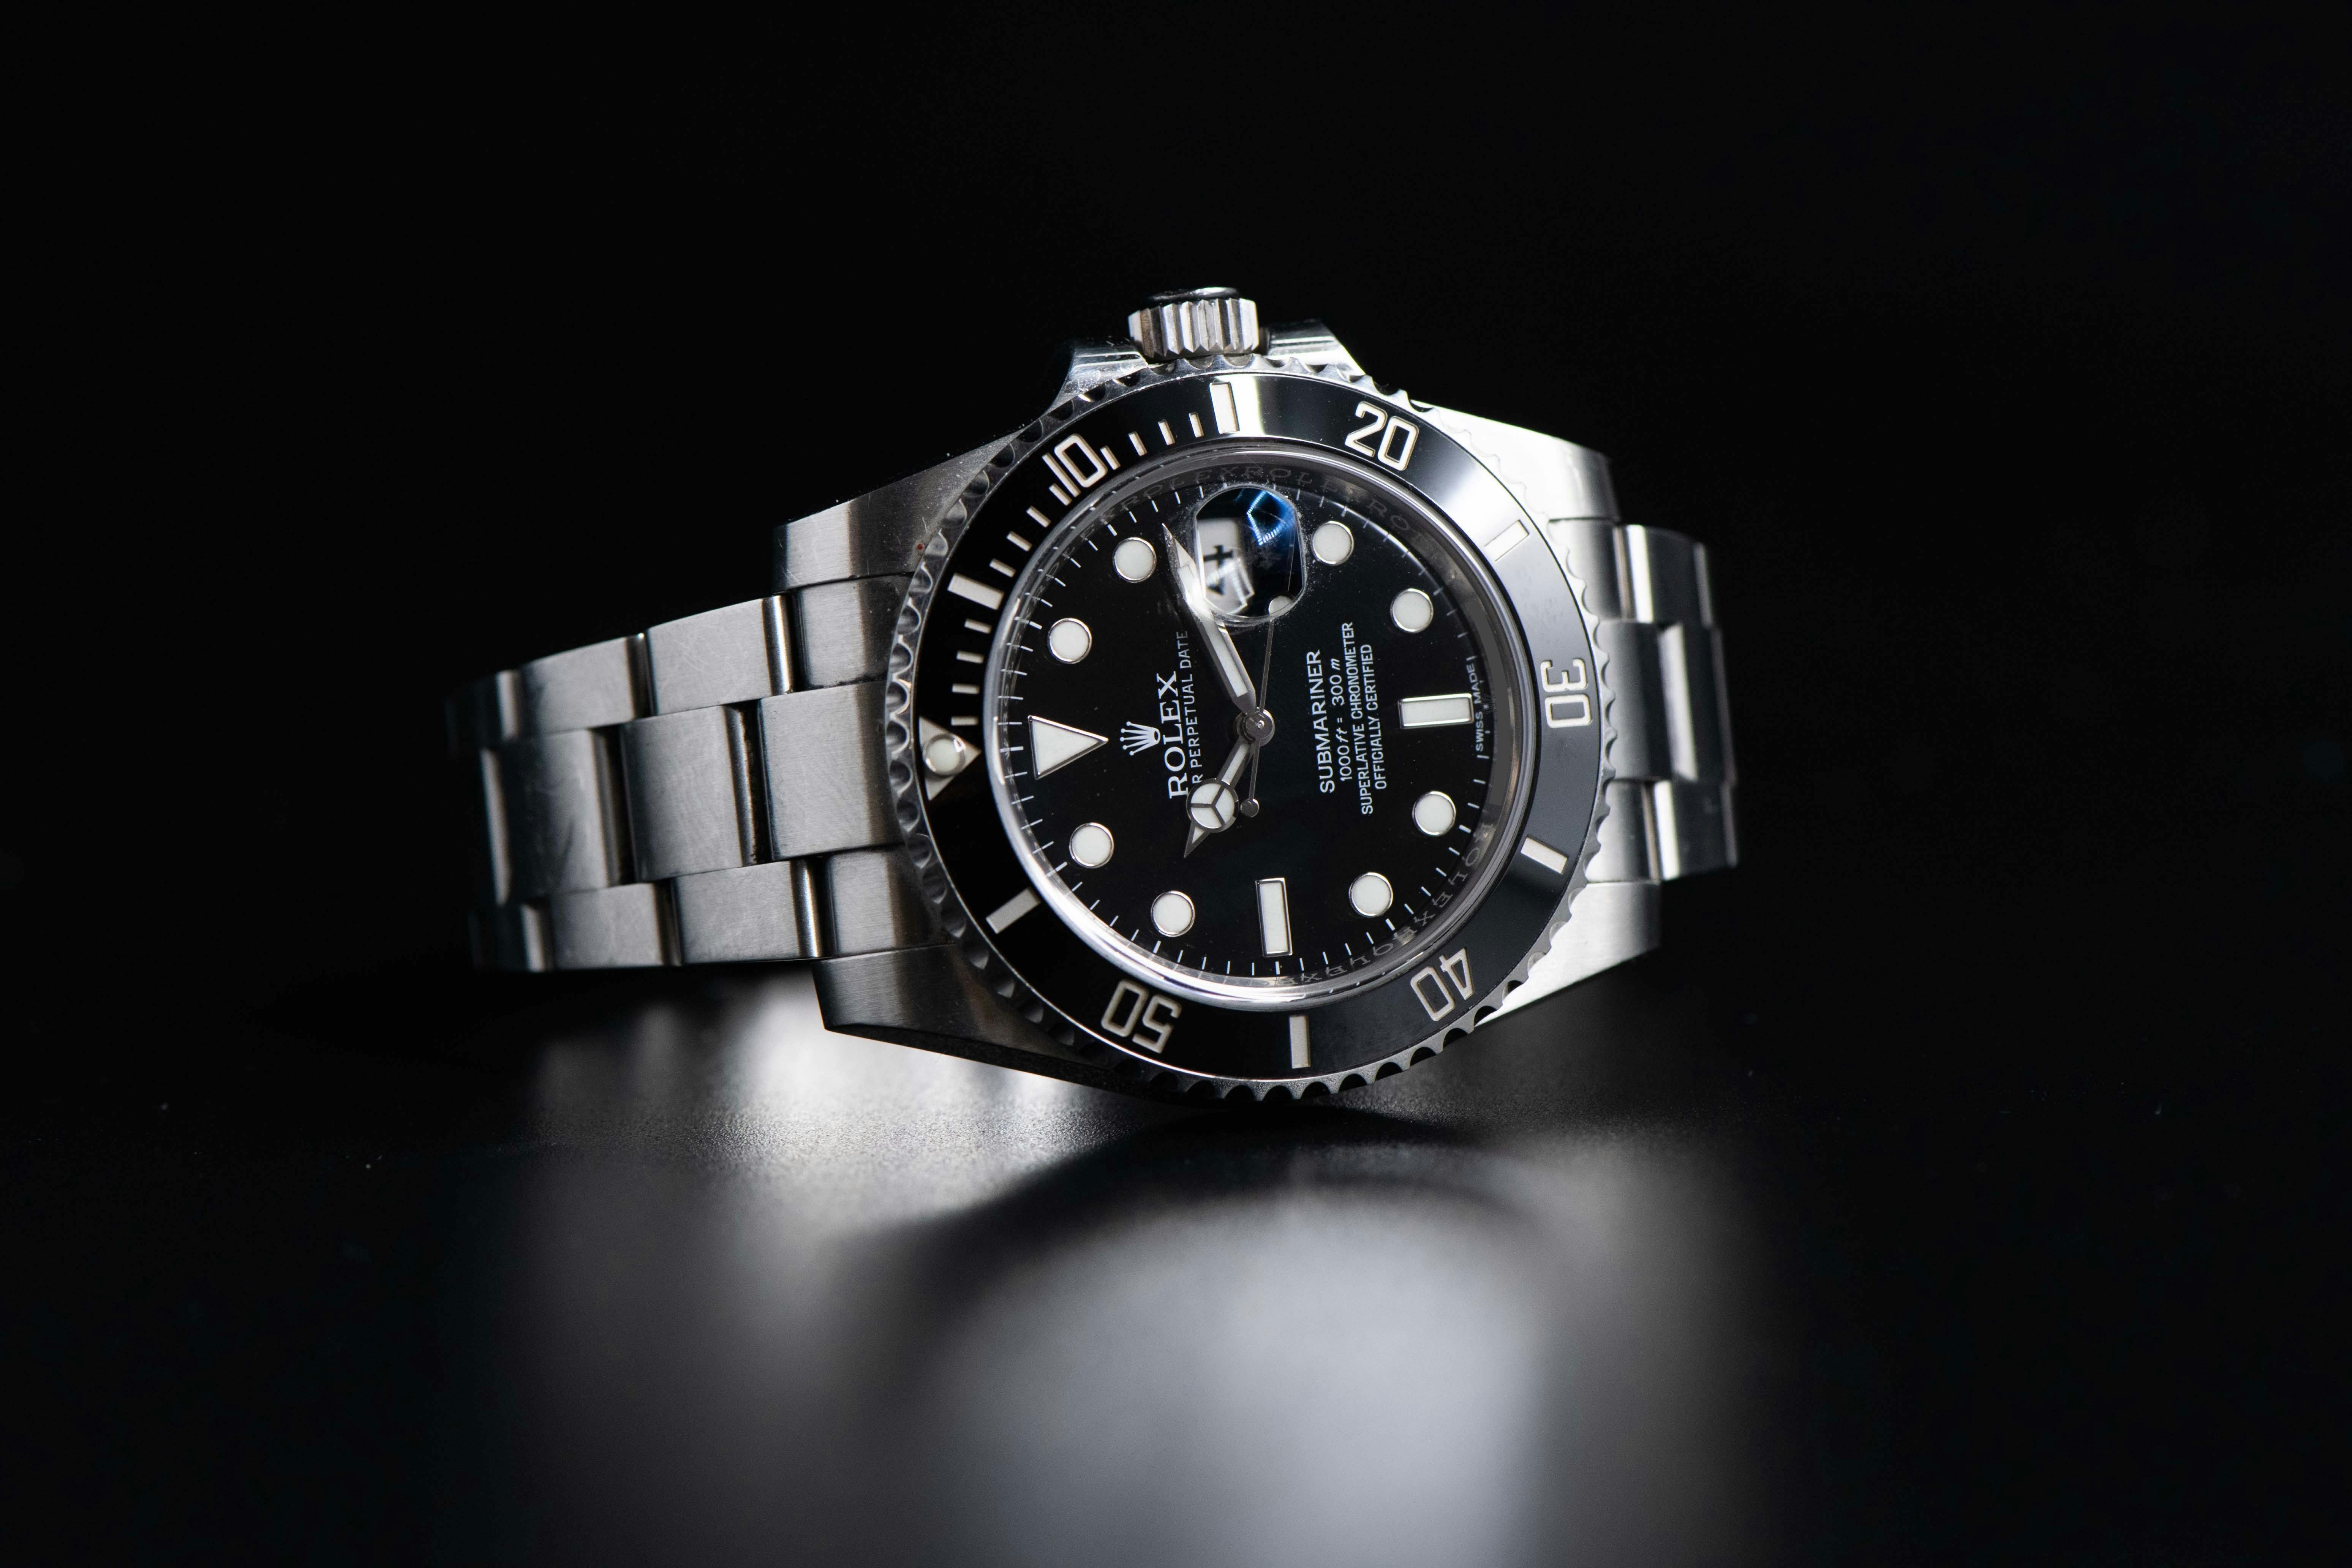 2010 Rolex Submariner for sale by auction in London, United Kingdom